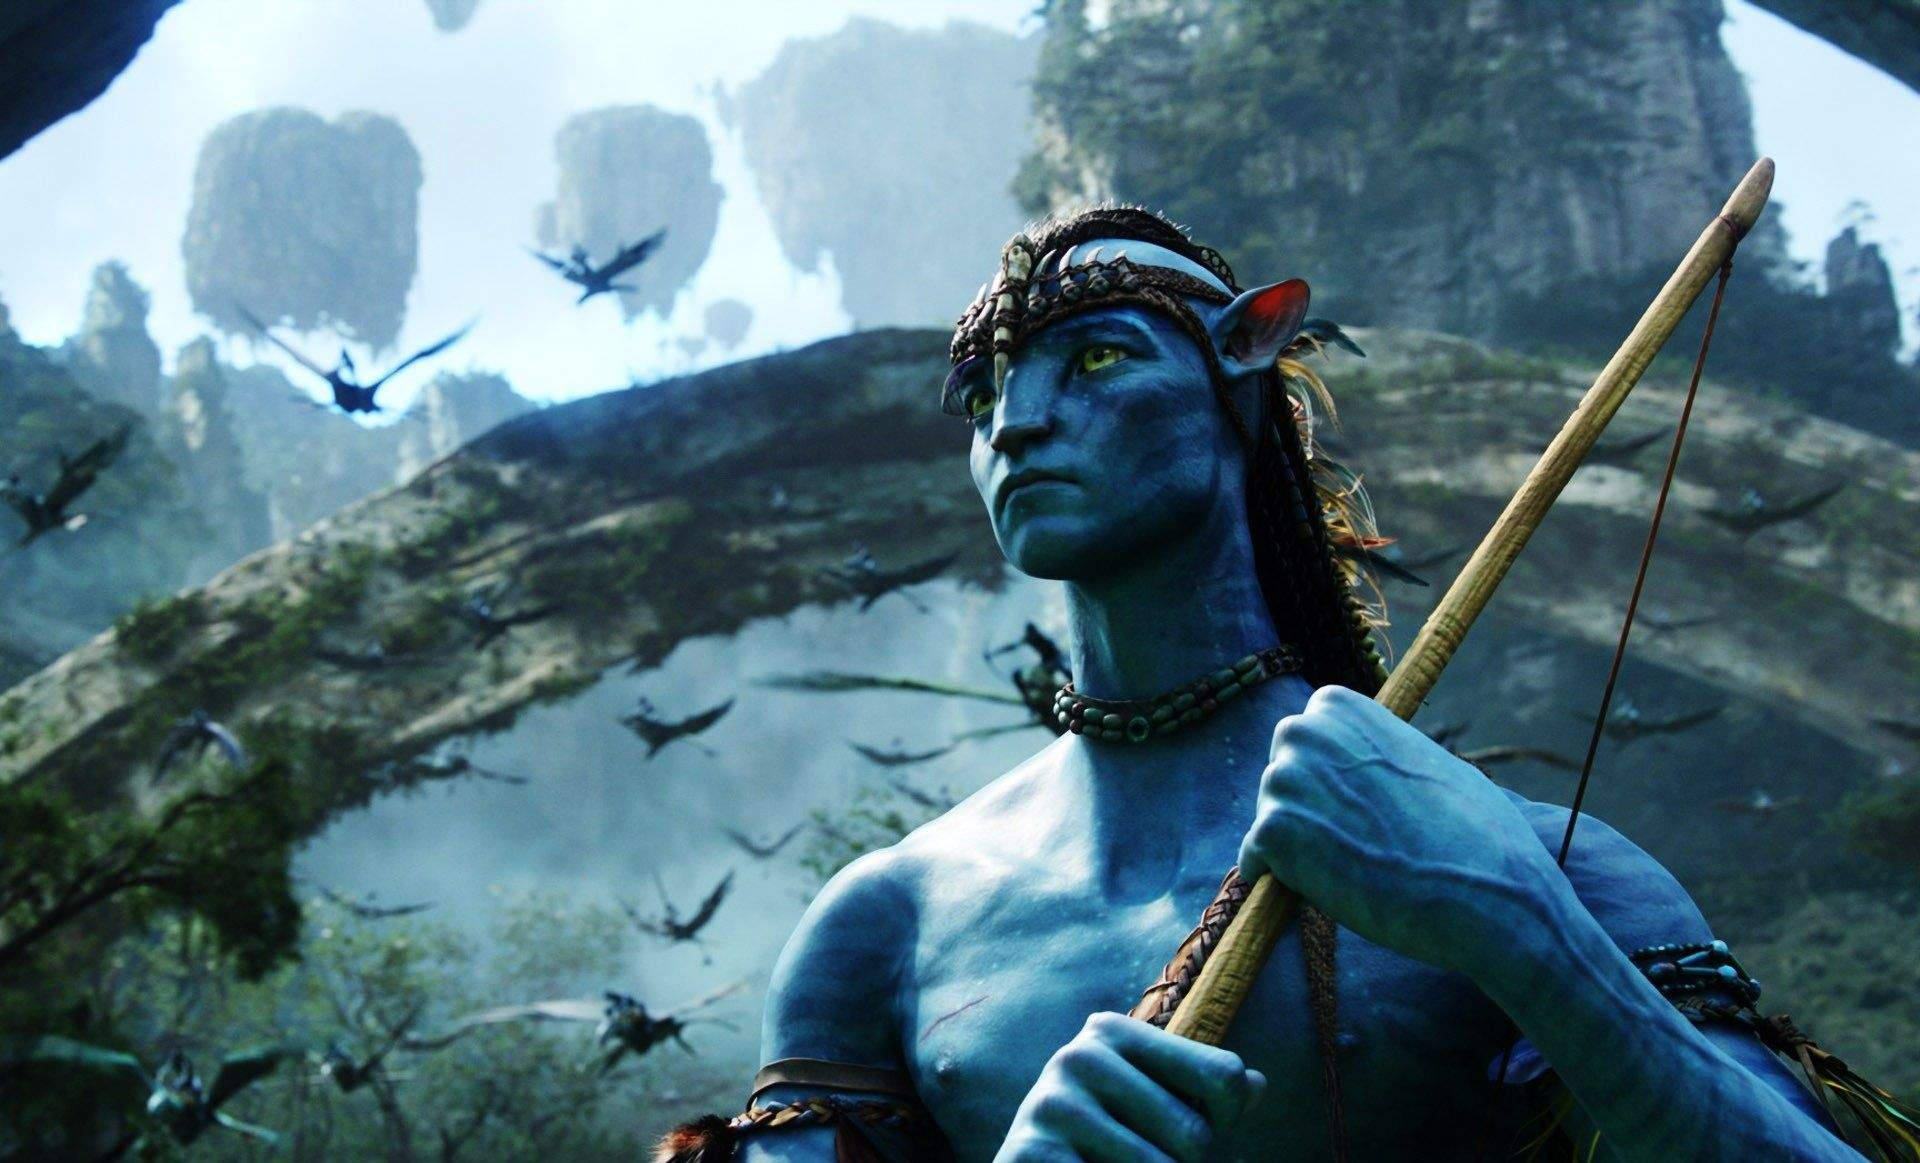 Free Avatar Wallpaper Downloads, [200+] Avatar Wallpapers for FREE |  